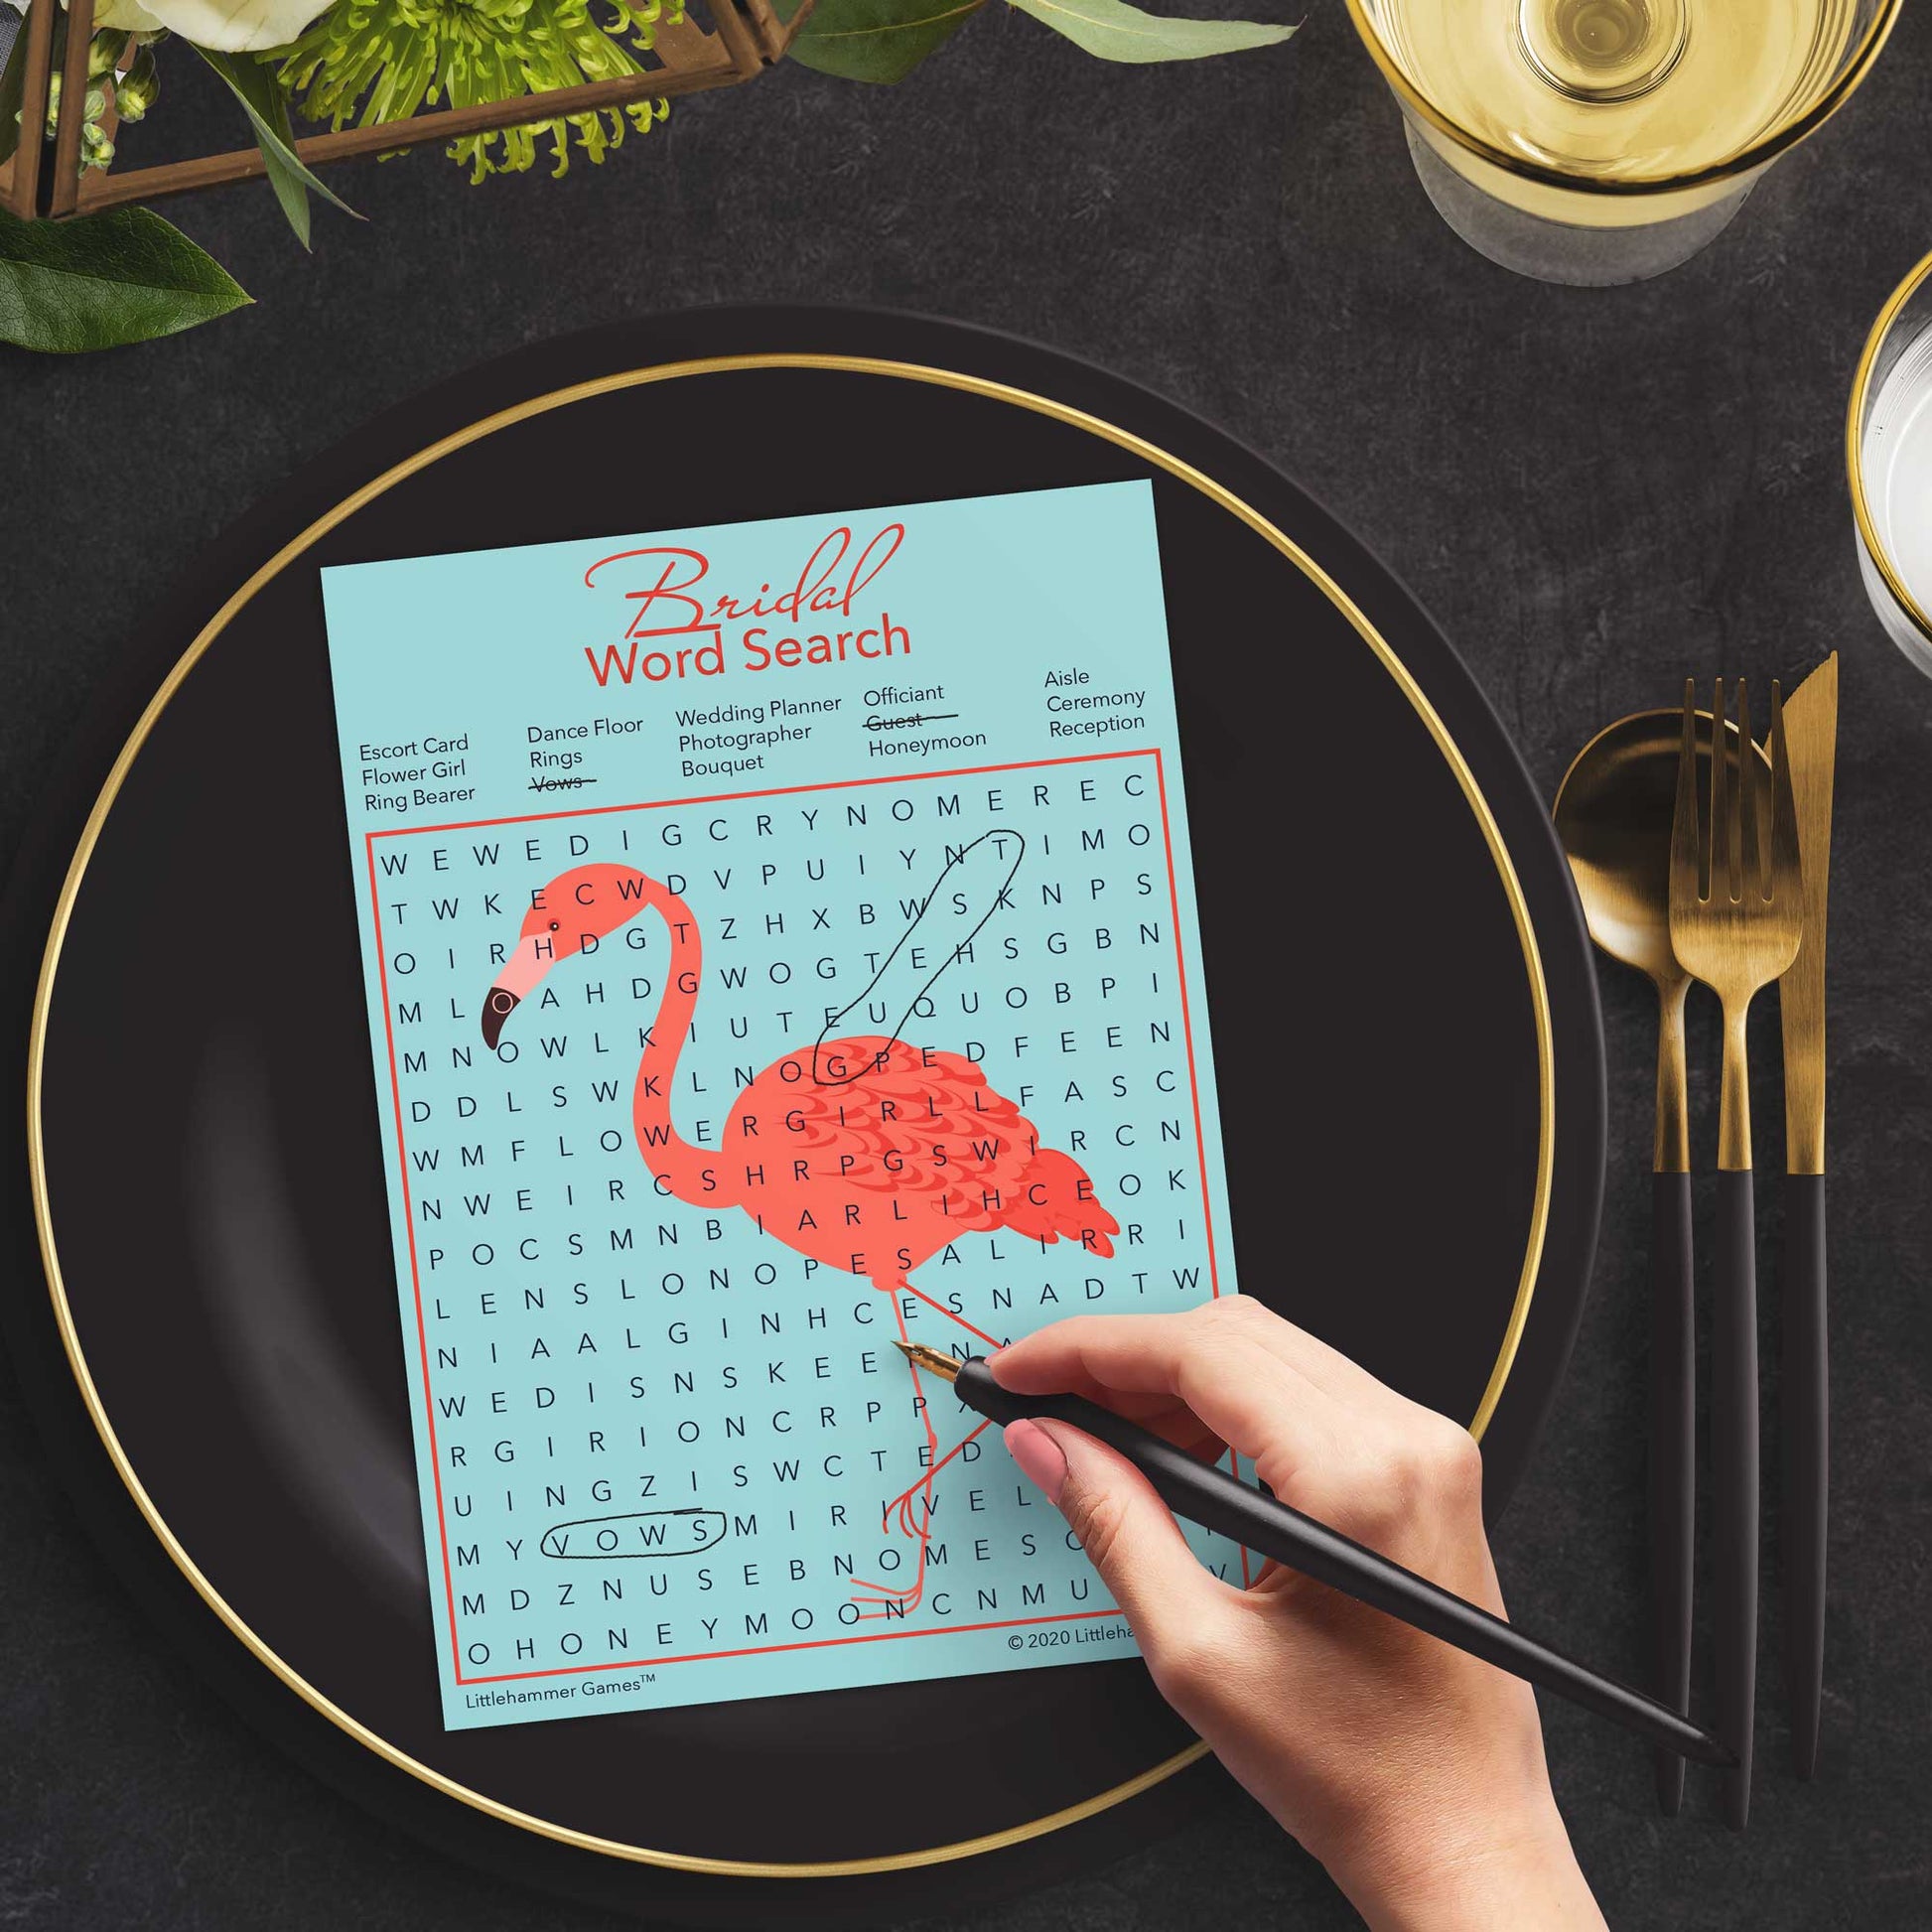 Woman with a pen playing a flamingo Bridal Word Search game card at a dark place setting